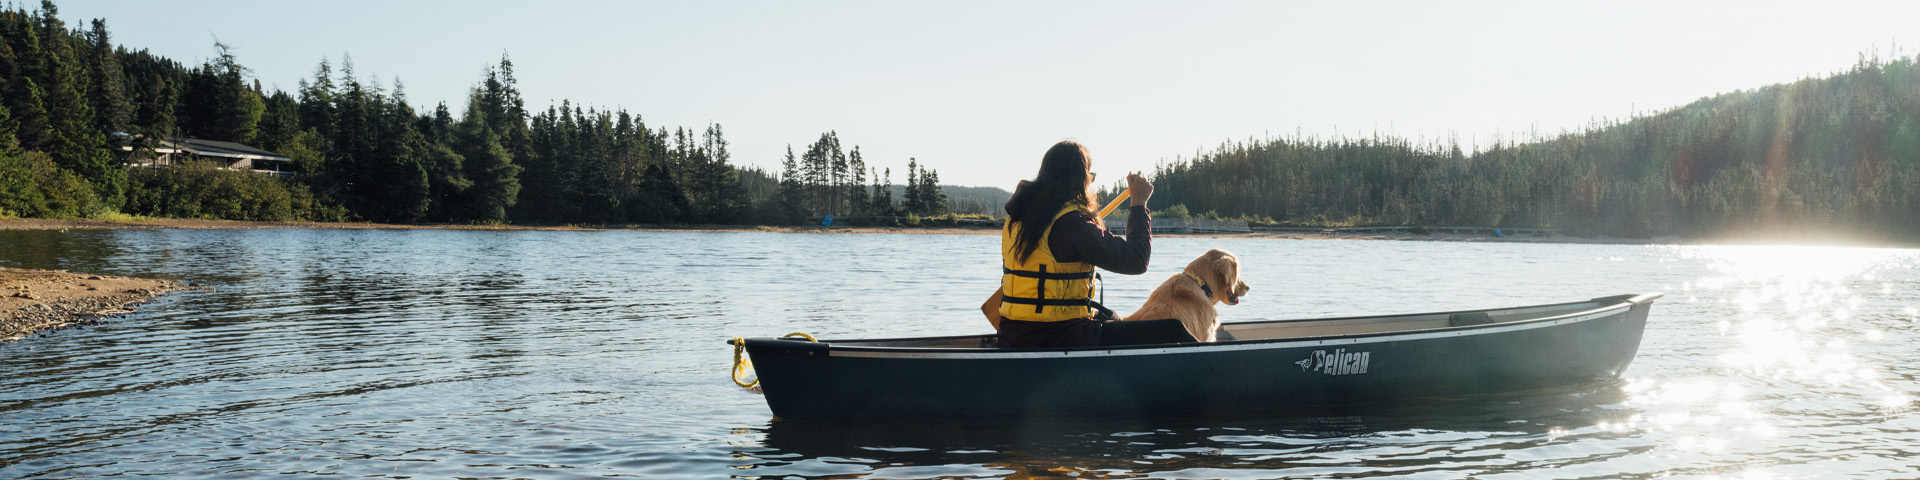 an individual and a dog in a canoe on a pond